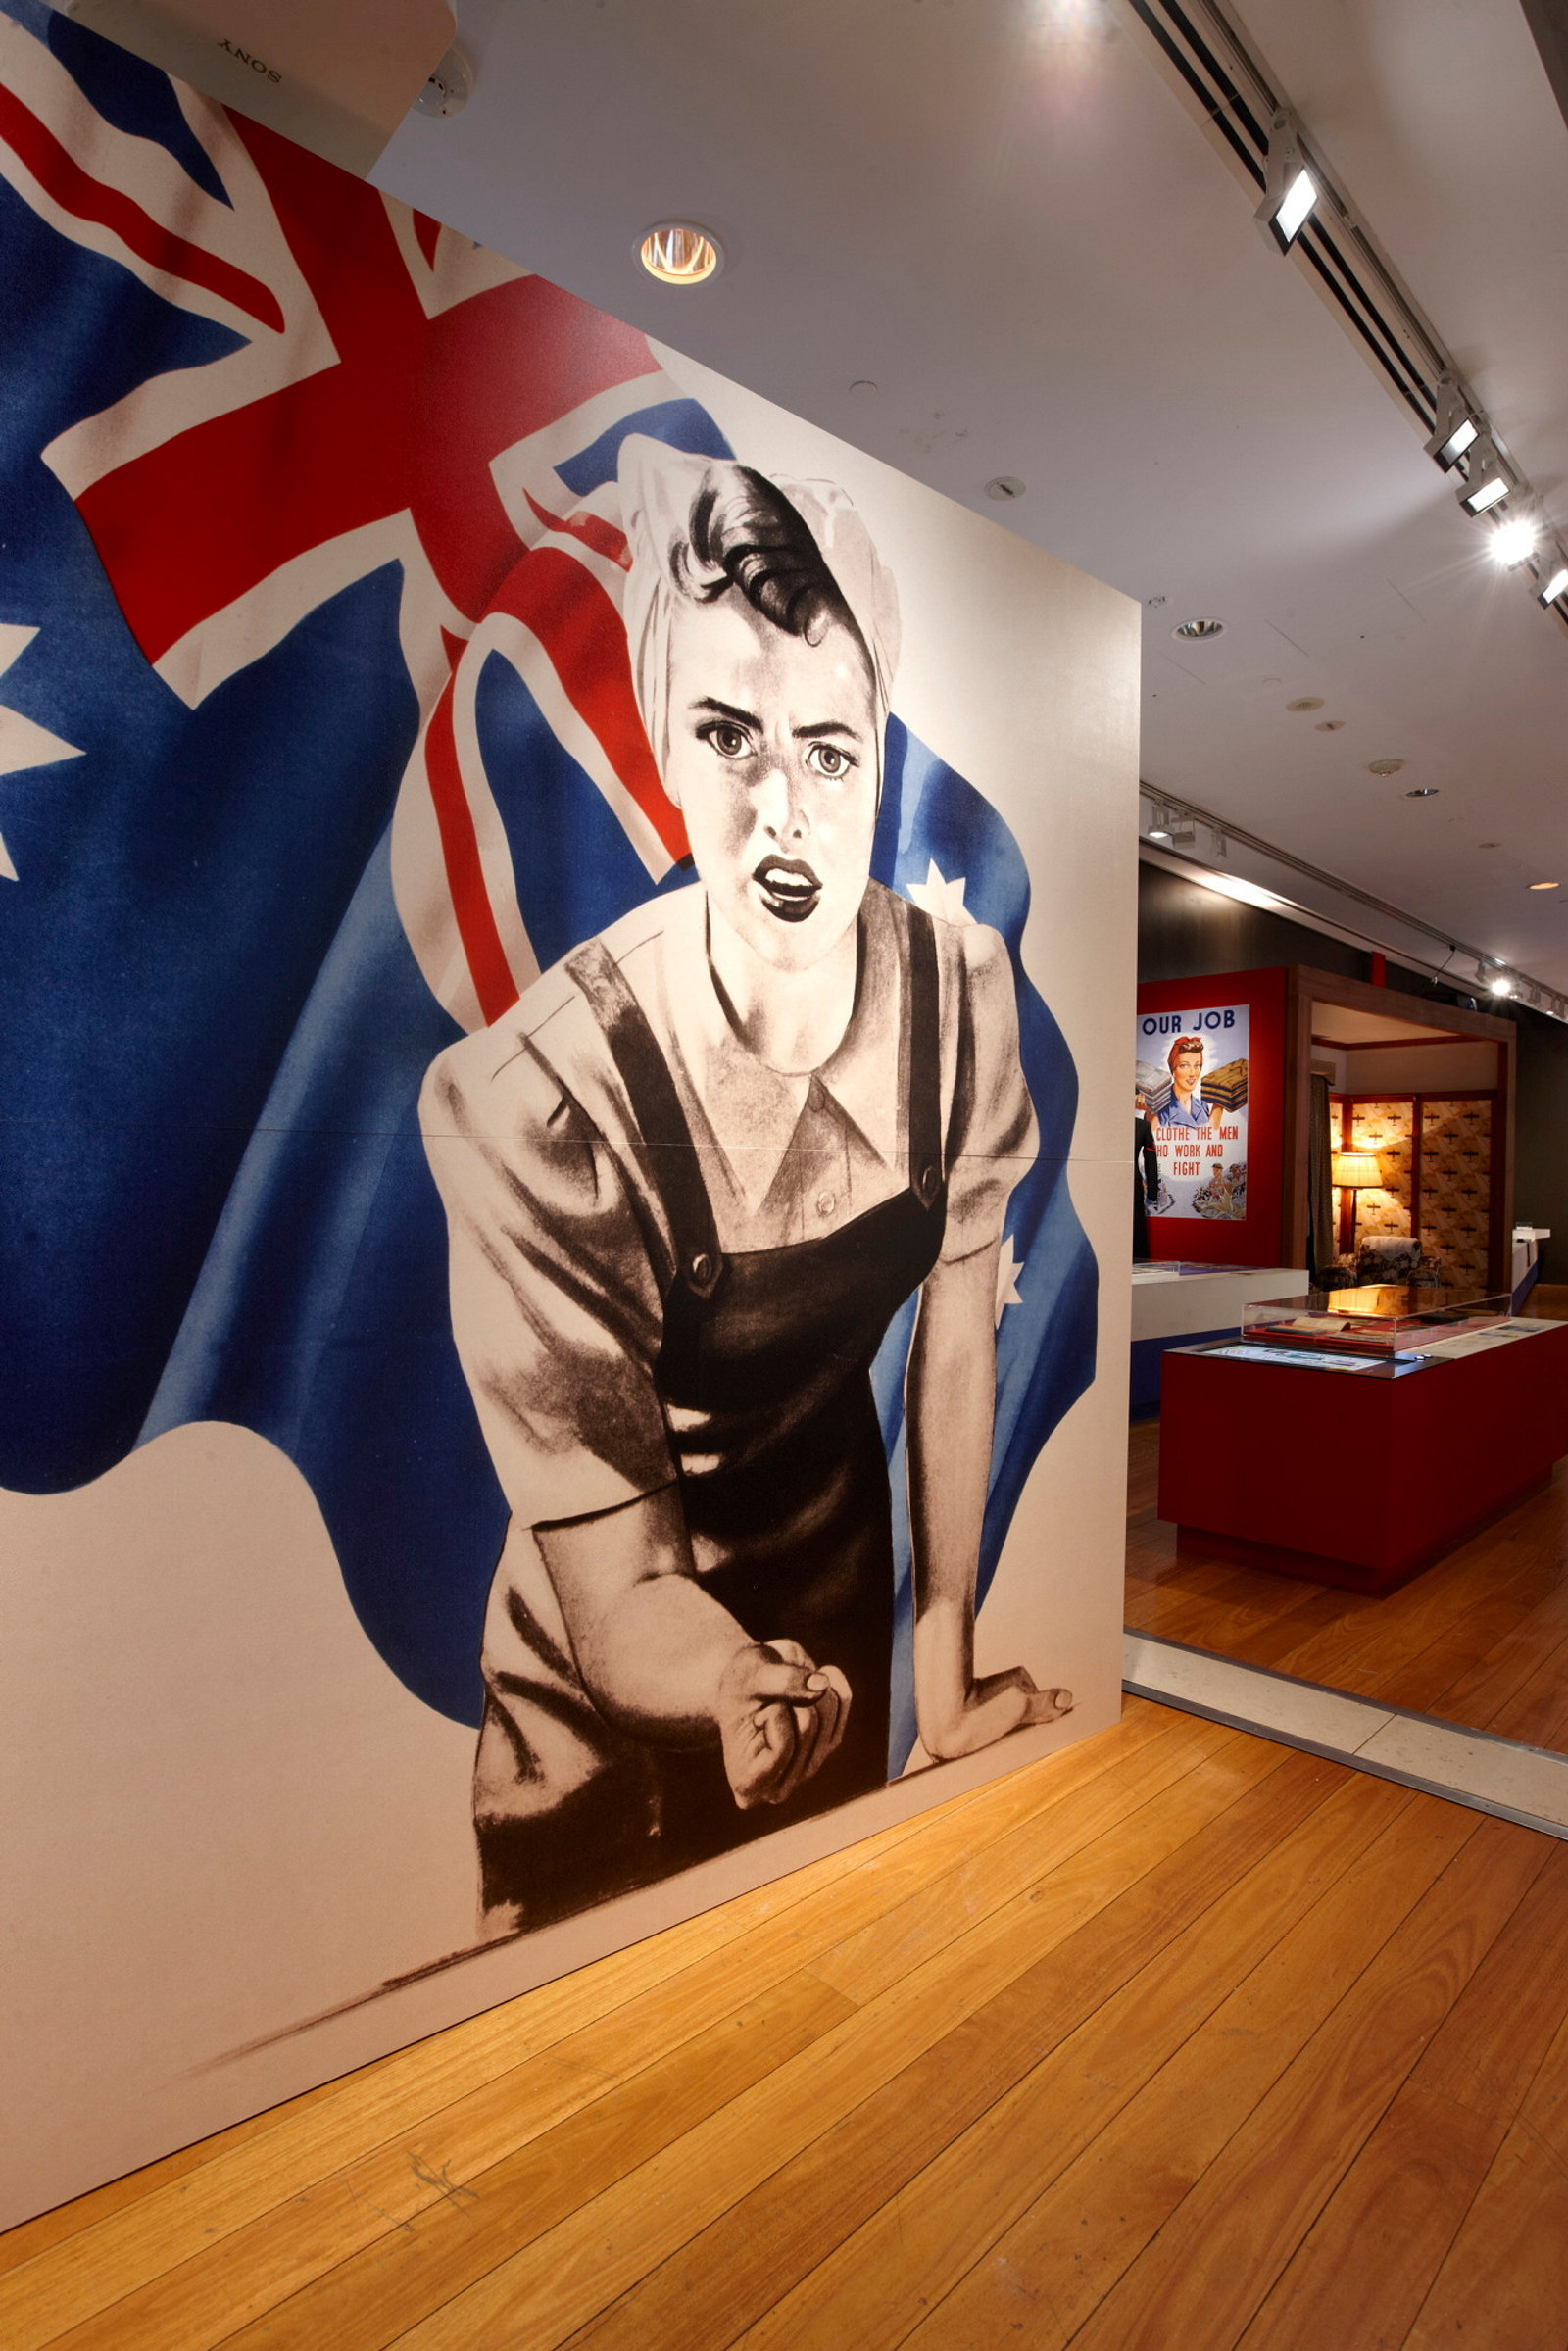 Home front: wartime Sydney 1939-45 installation view